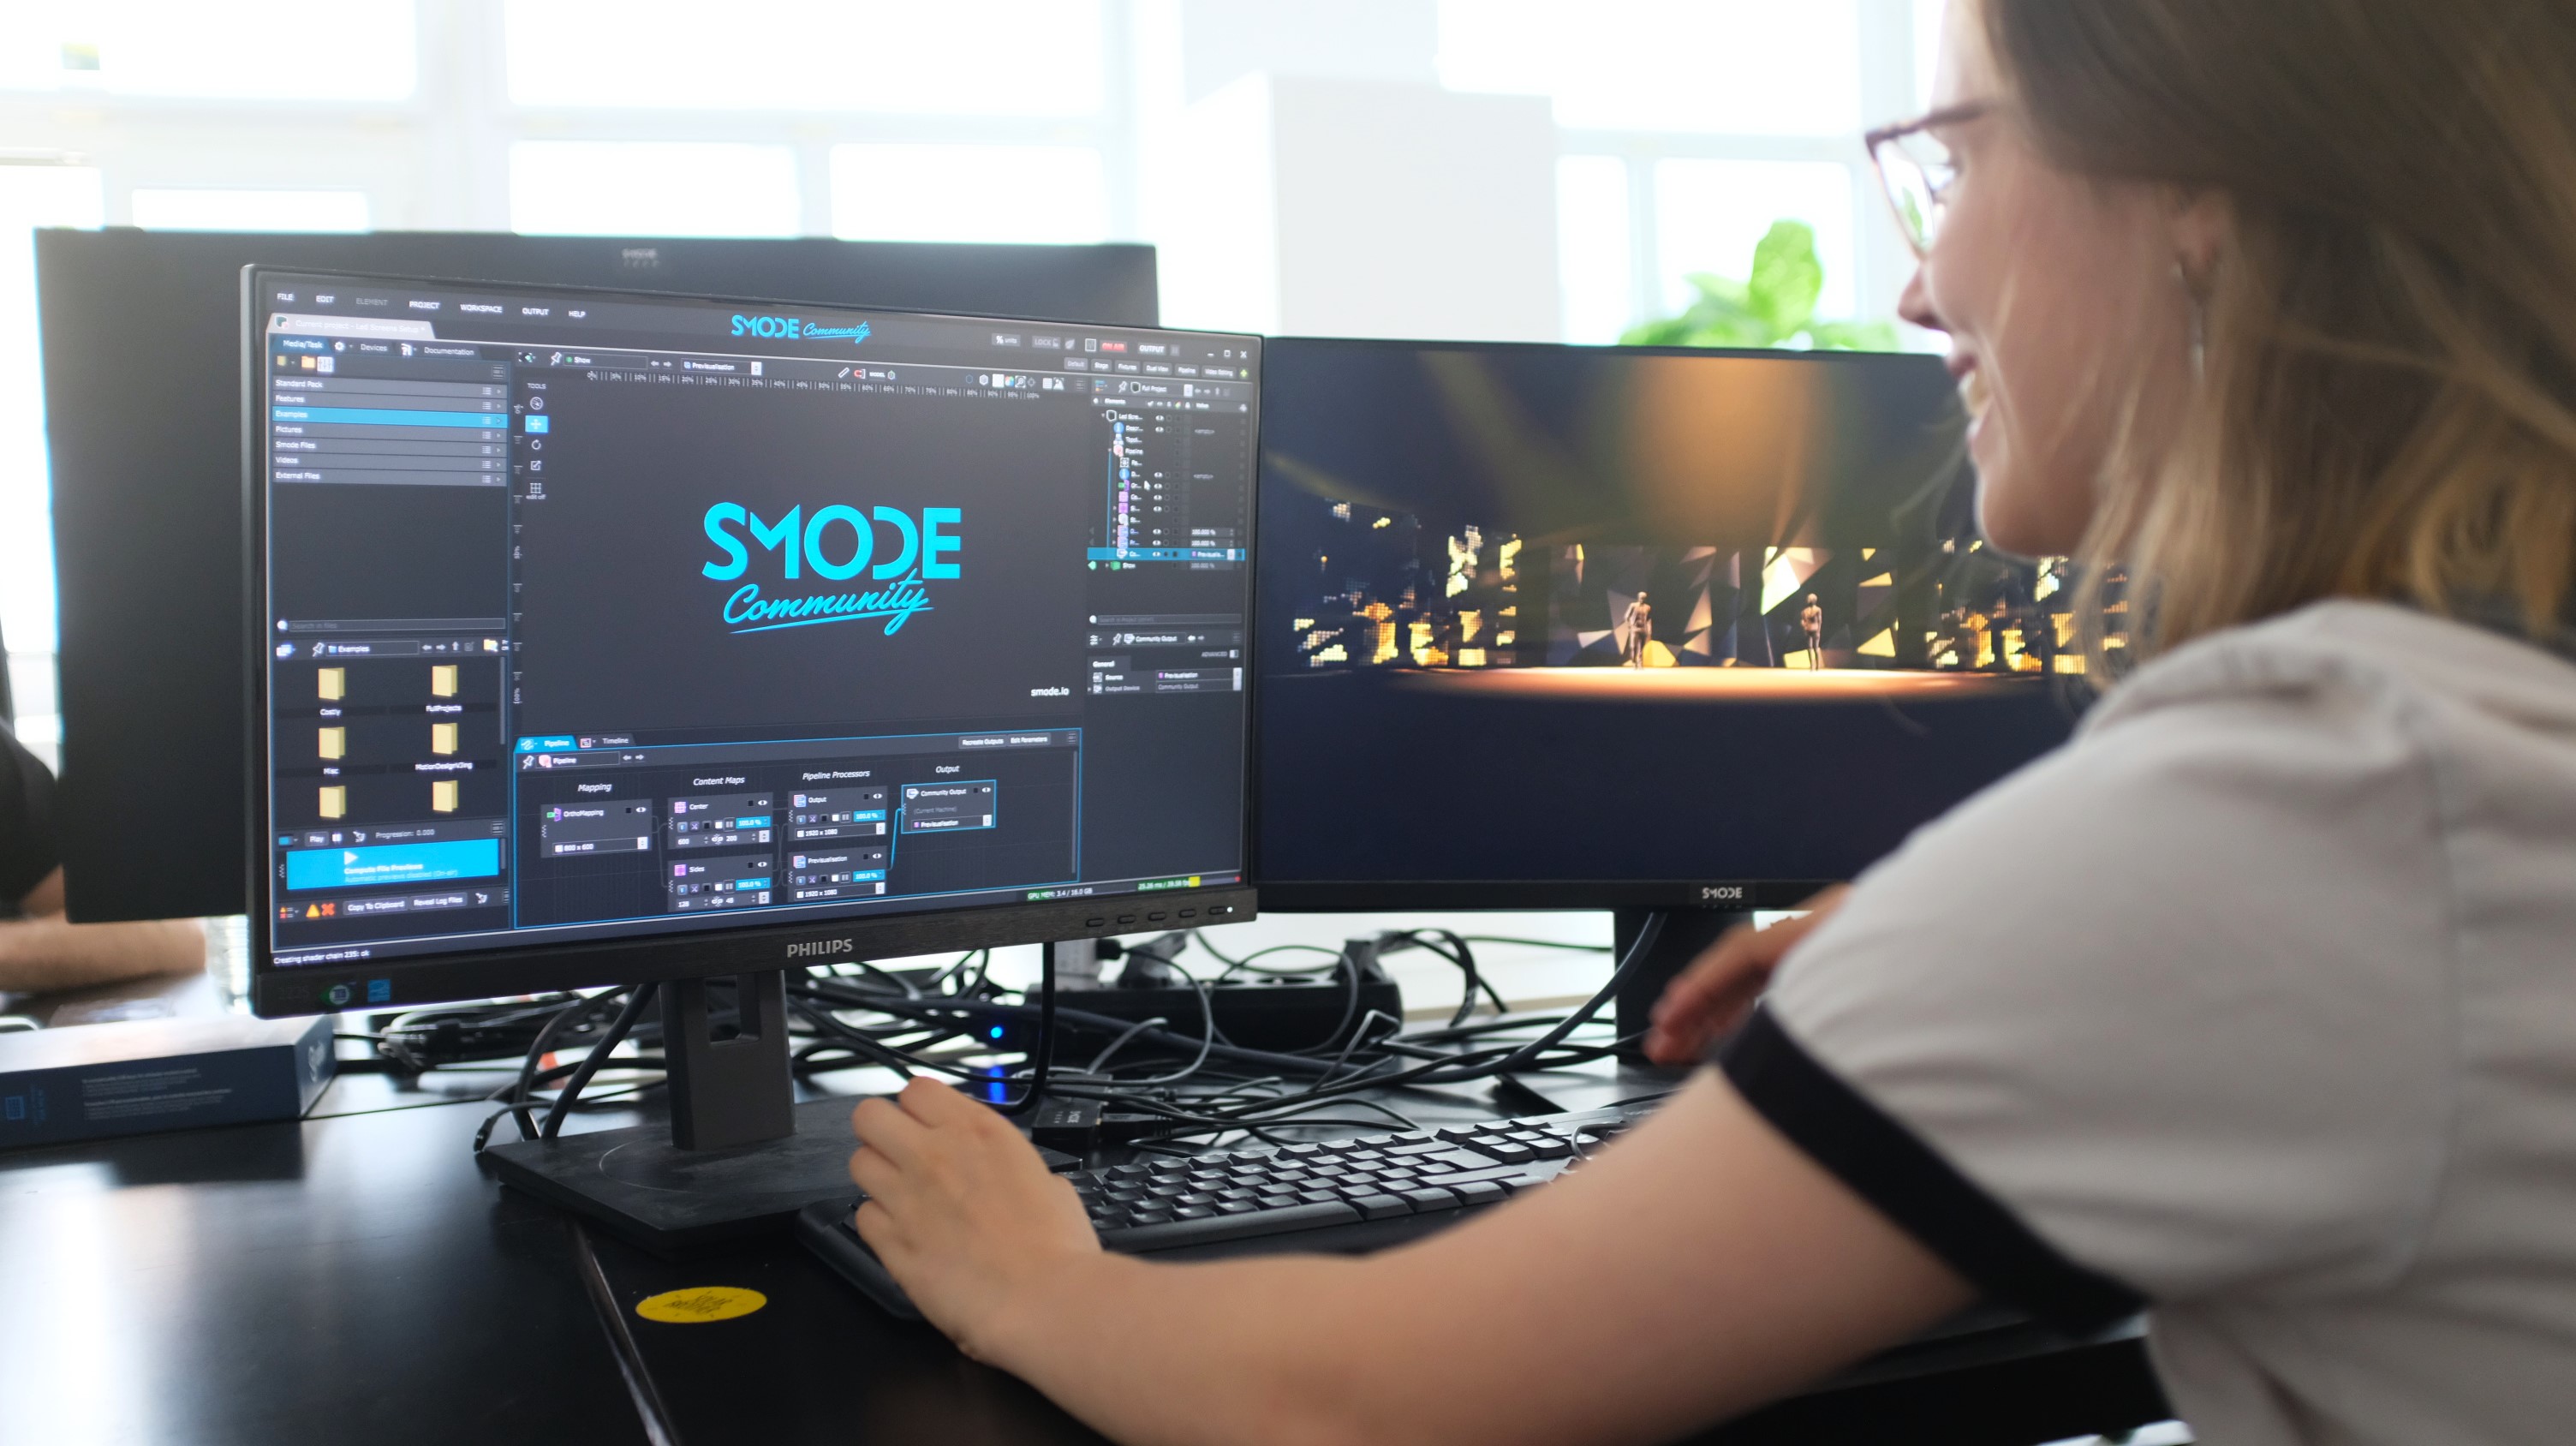 Smode Community: Discover the free version of SMODE!